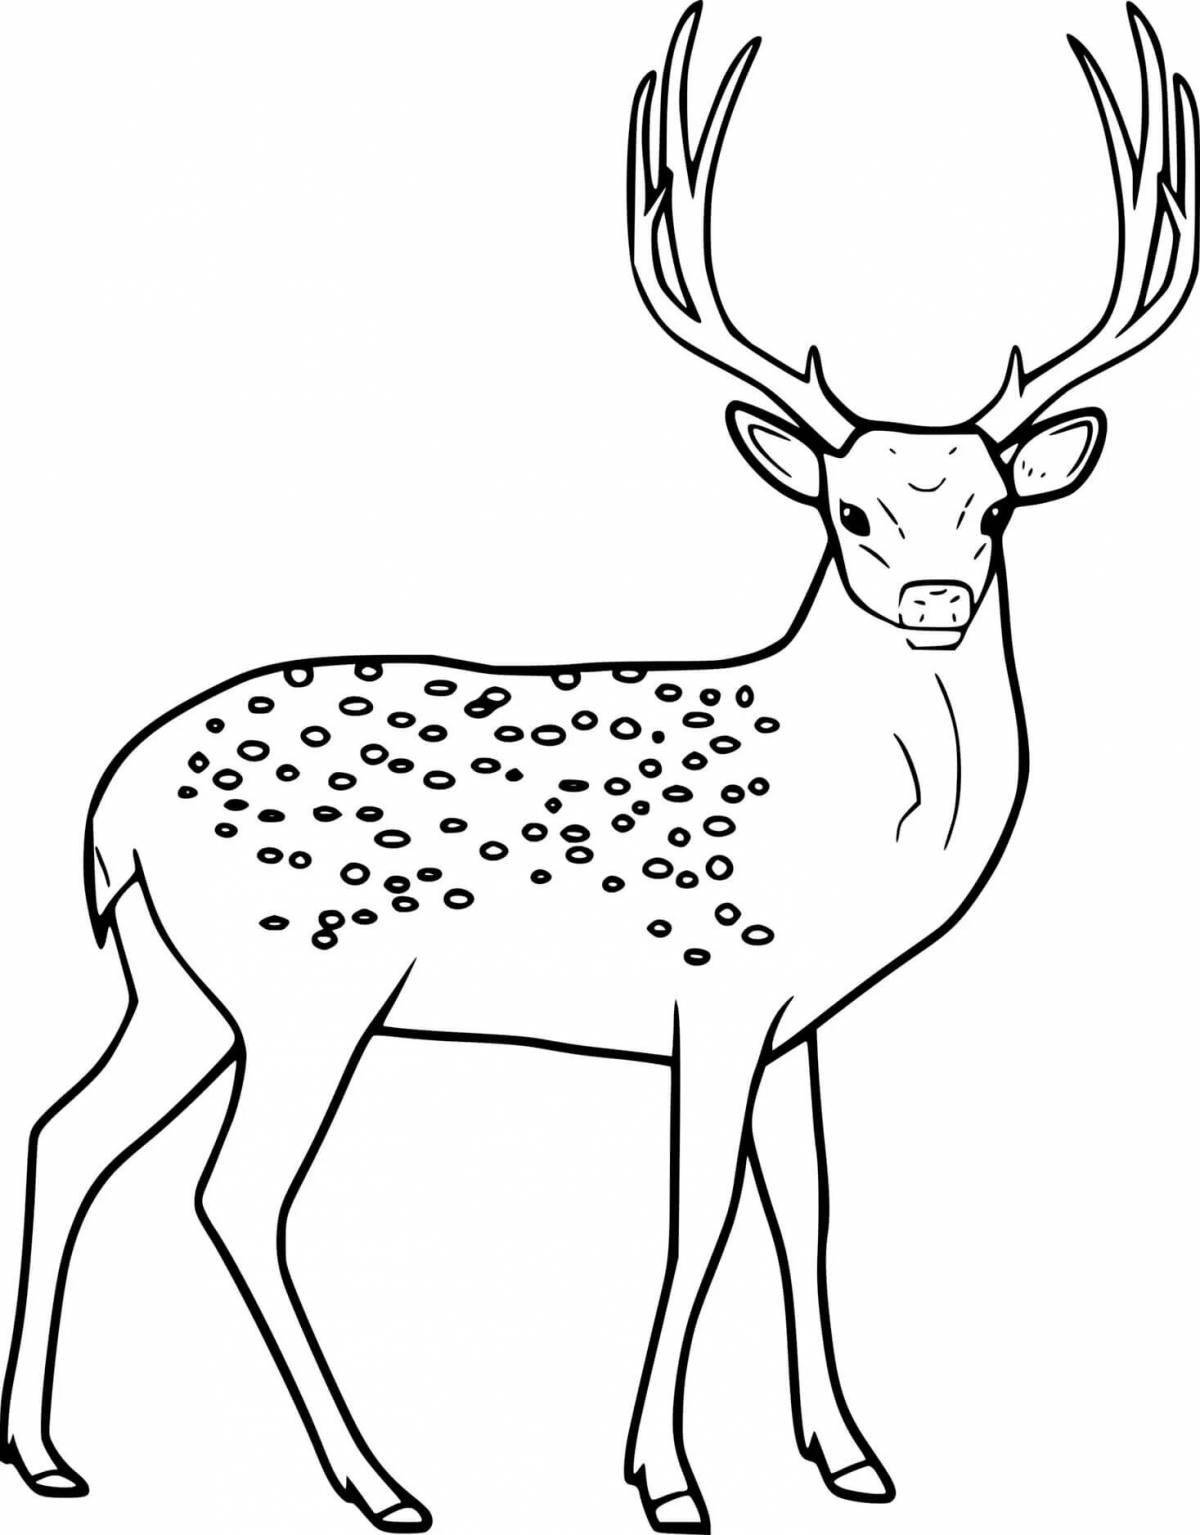 Majestic deer coloring book for kids 6-7 years old